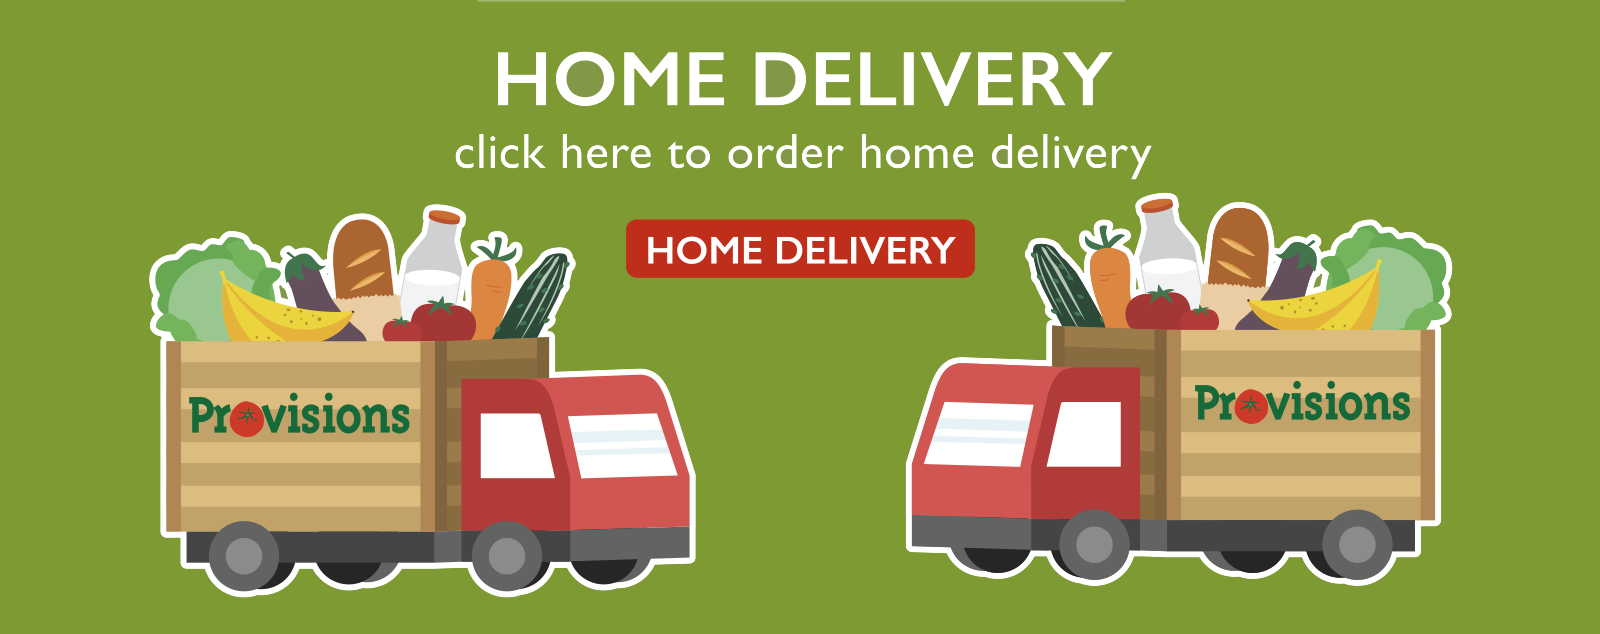 HOME DELIVERY - click here to order home delivery - HOME DELIVERY